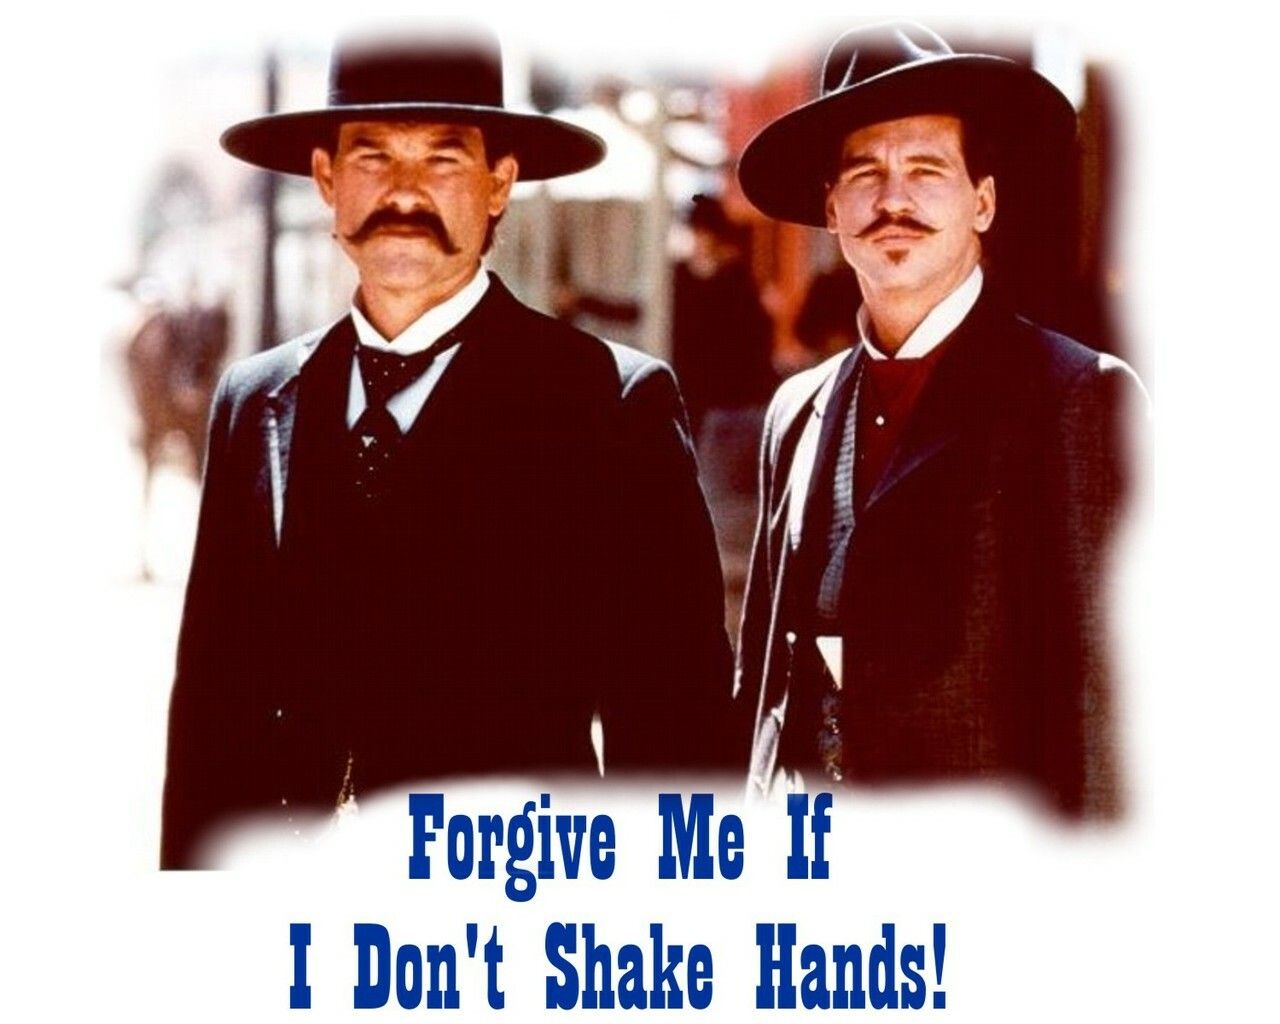 Tombstone Forgive Me If I Don't Shake Hands, Doc Holliday